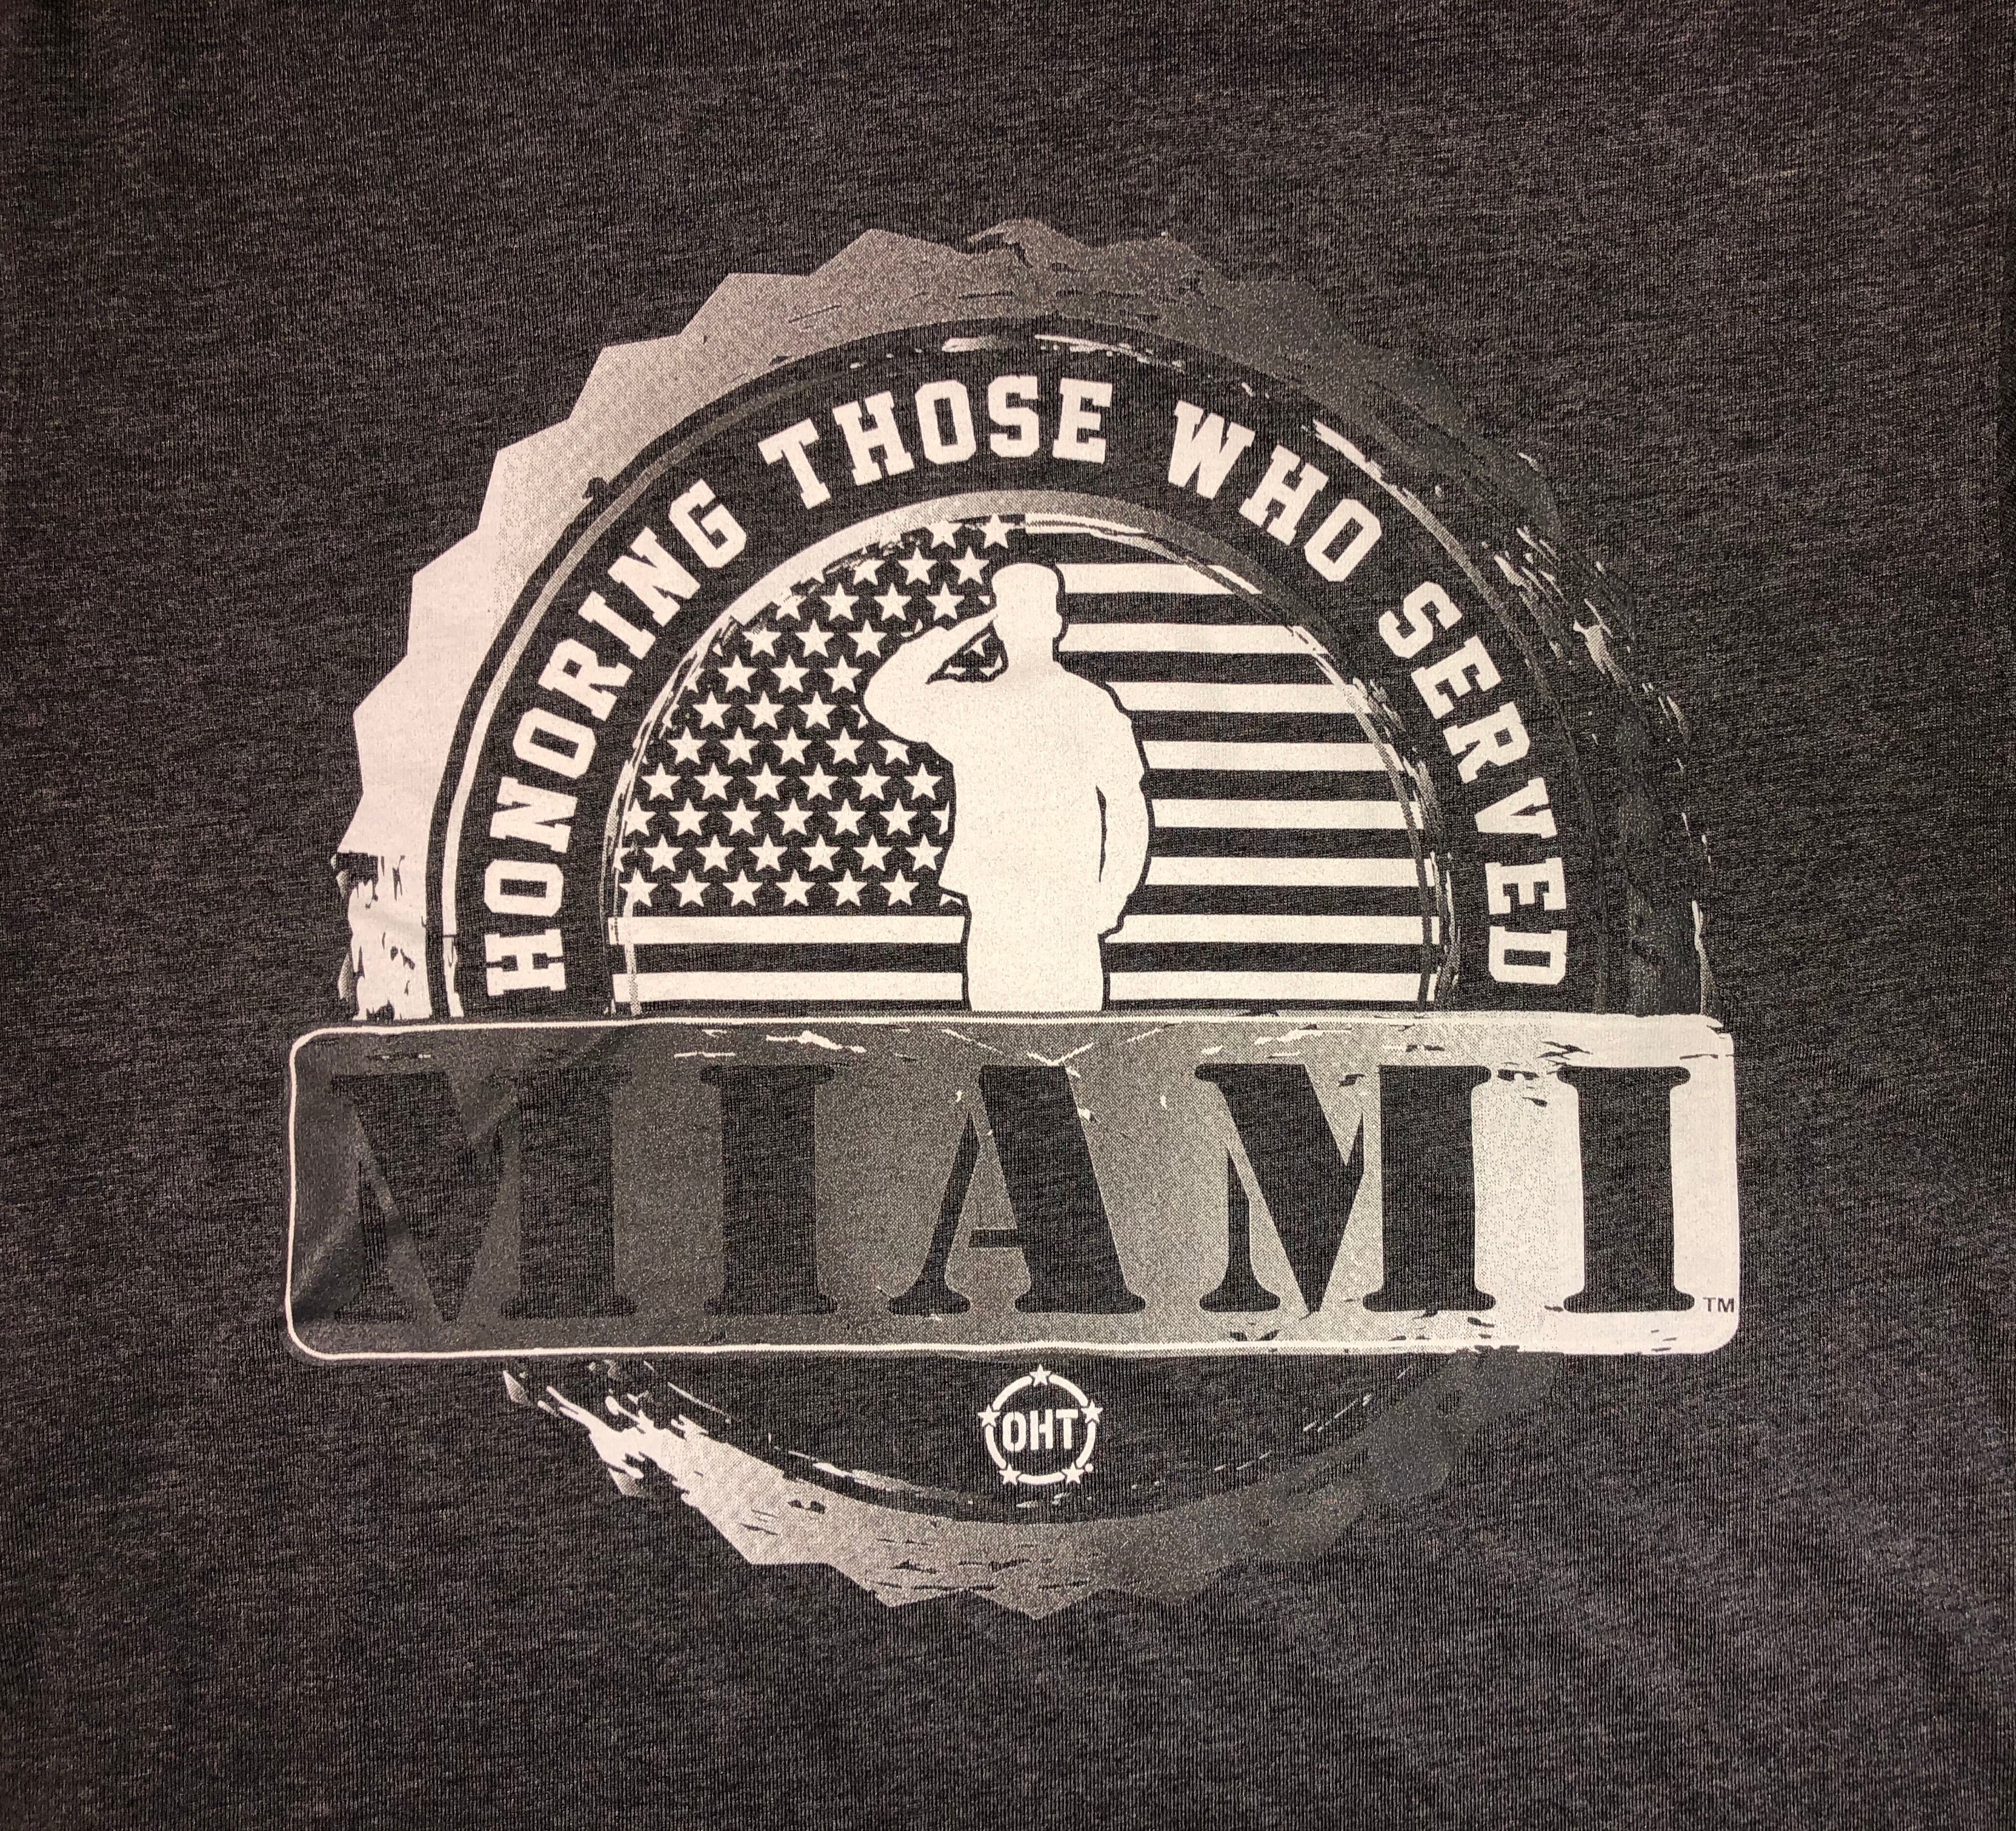 Miami Hurricanes OHT Honoring Those Who Served T-Shirt - Charcoal